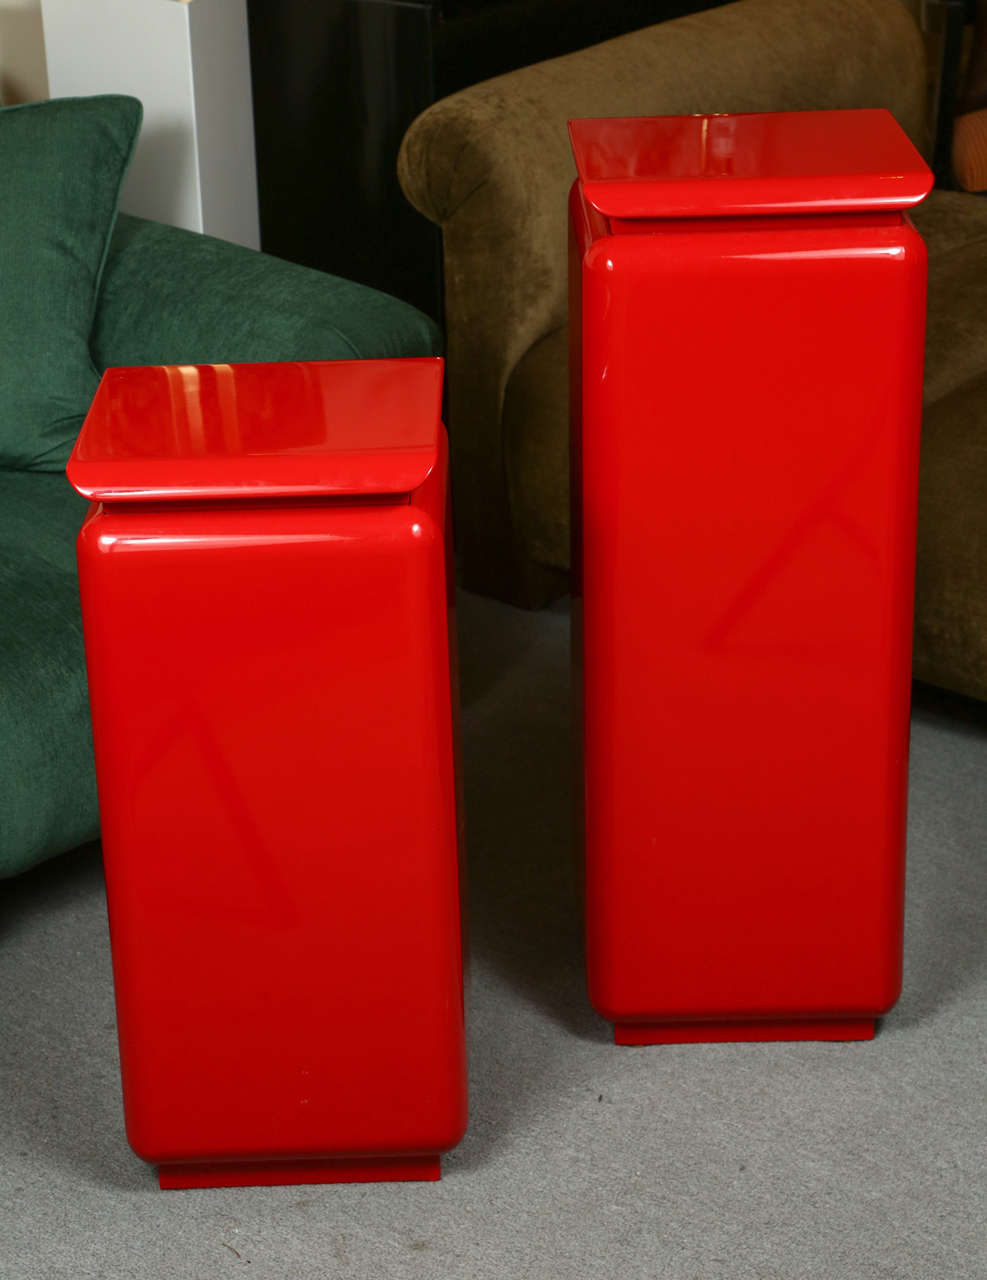 Pair of beautiful pedestals by Rougier.   The glossy lacquered finish is a gorgeous Chinese red. They have the same dimensions except for the height.   
One is 35